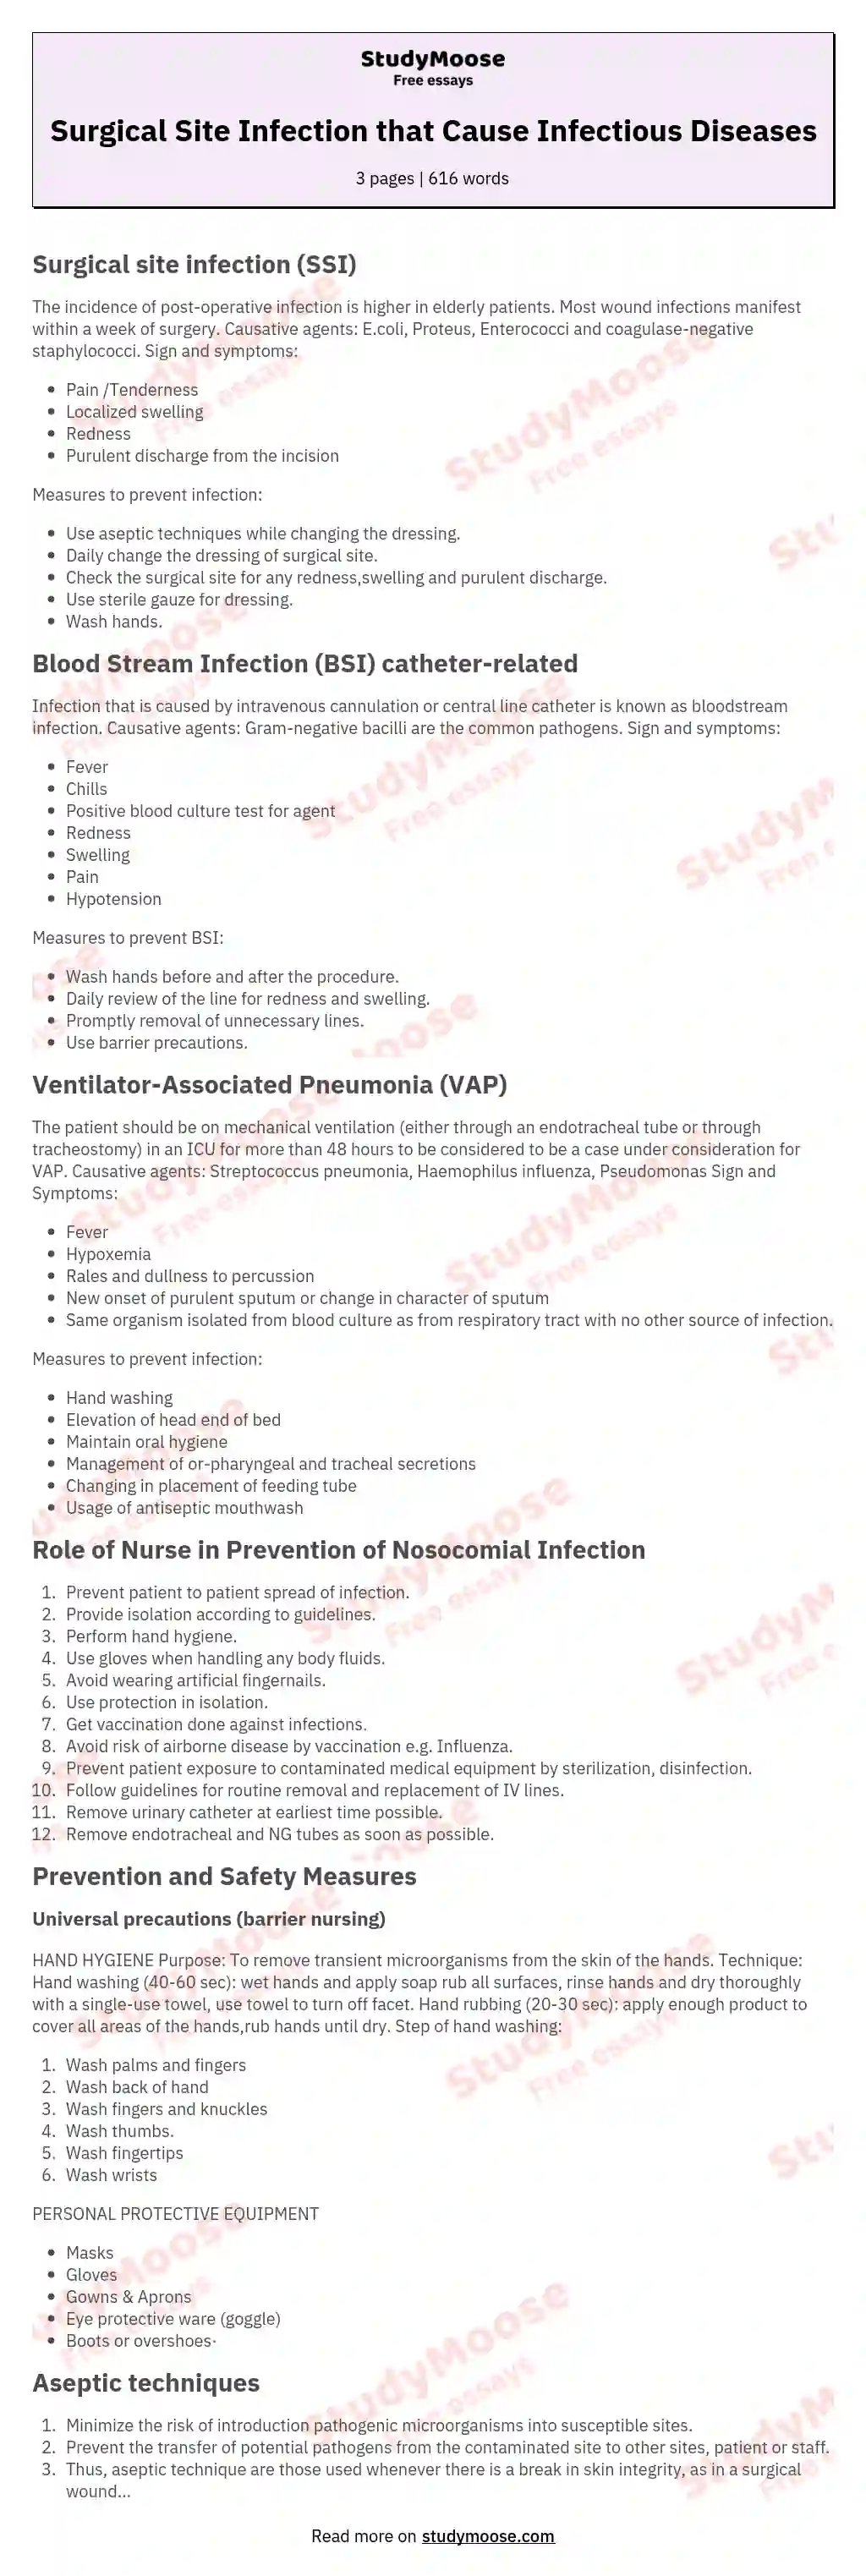 Surgical Site Infection that Cause Infectious Diseases essay